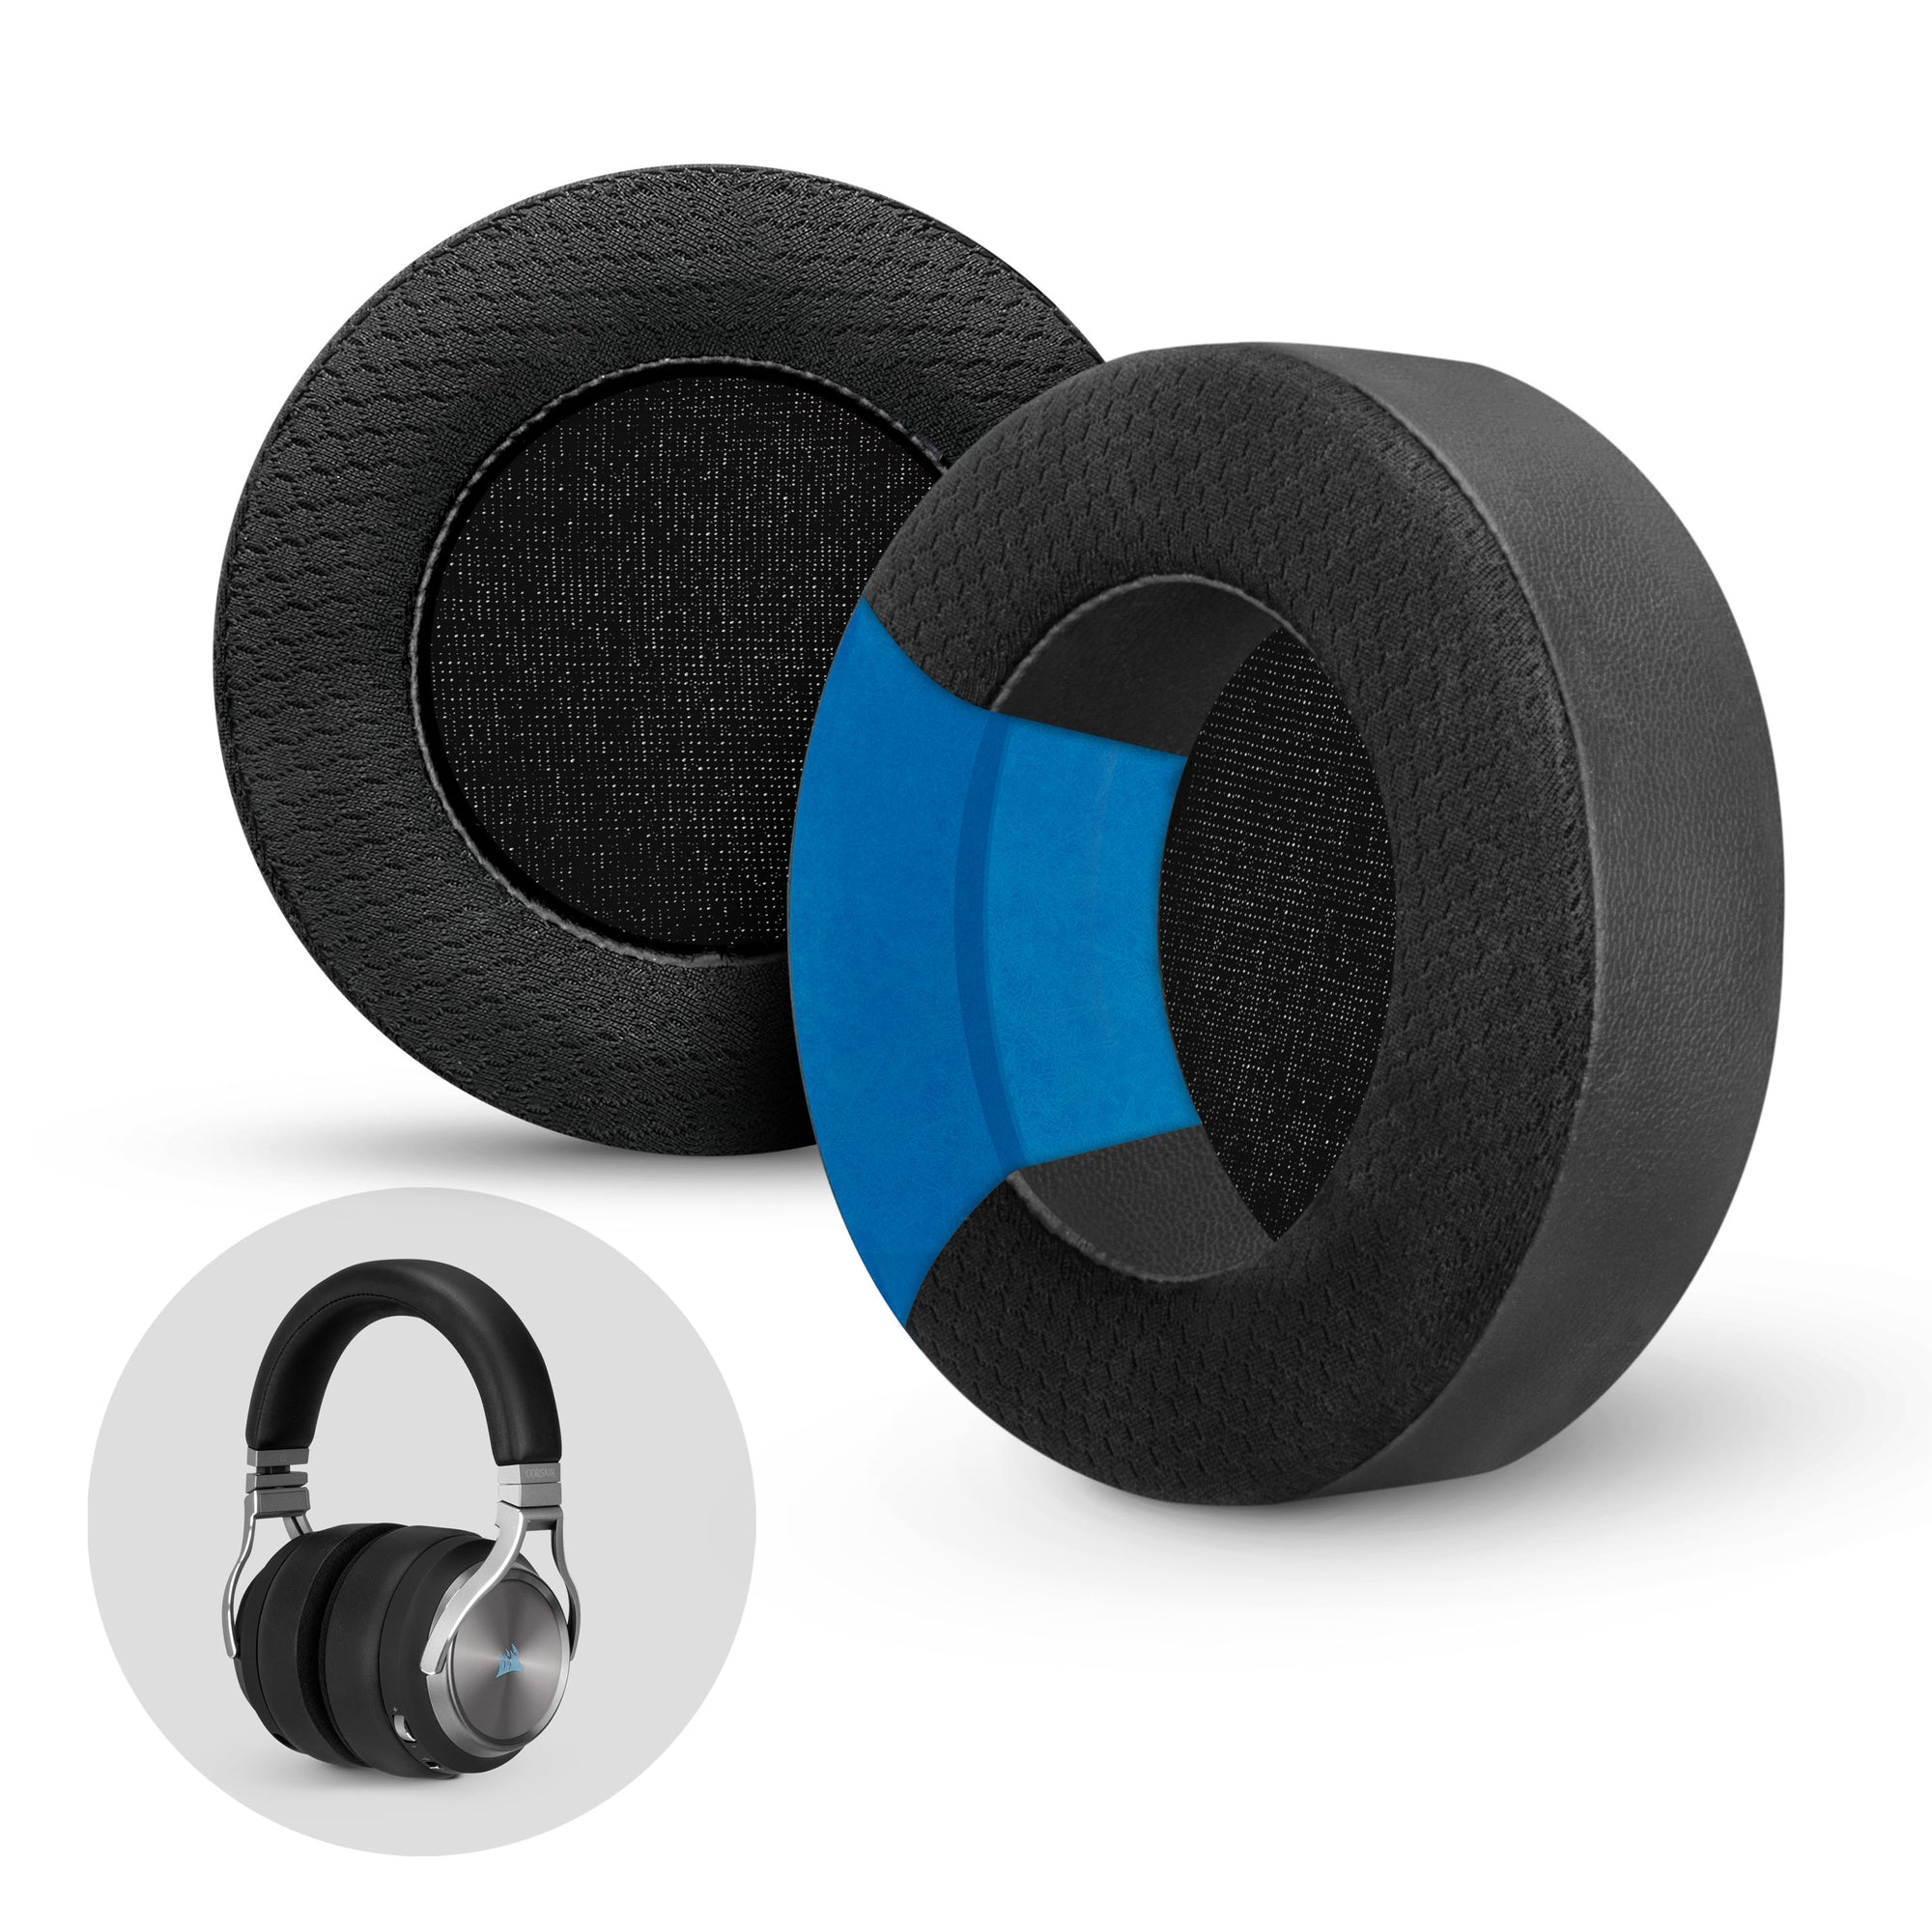 Hybrid Virtuoso Earpads with Cooling Gel, Memory Foam & Breathable Mesh Fabric for Corsair Virtuoso Gaming Headset, Improved Durability, Thickness & Sound Isolation